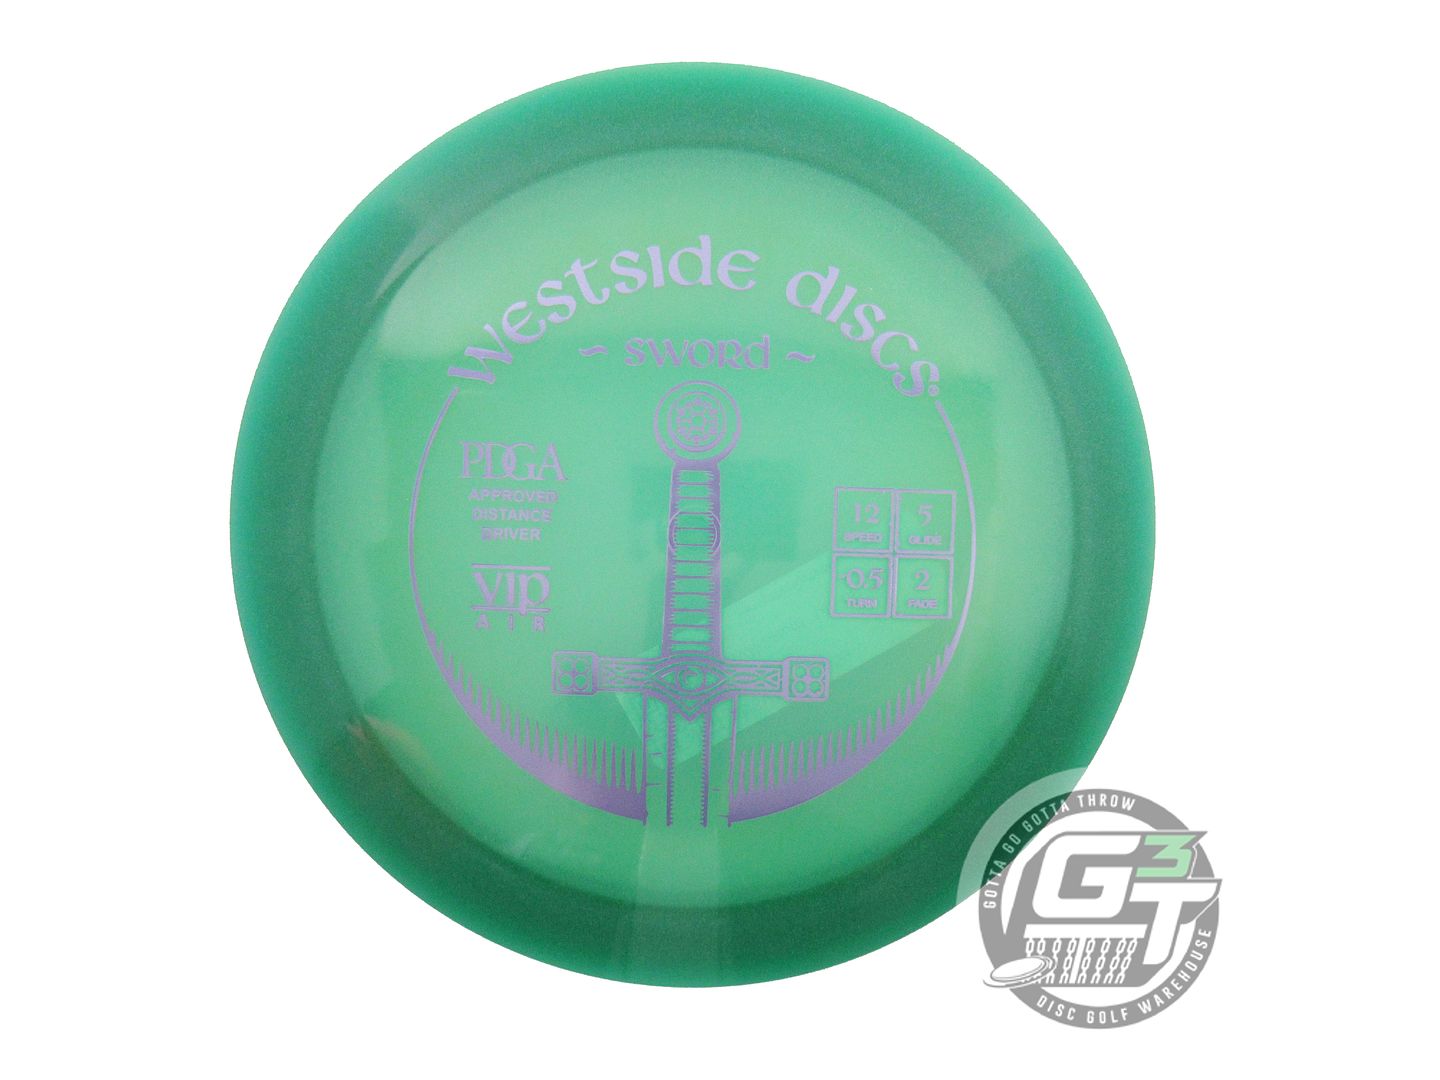 Westside VIP AIR Sword Distance Driver Golf Disc (Individually Listed)